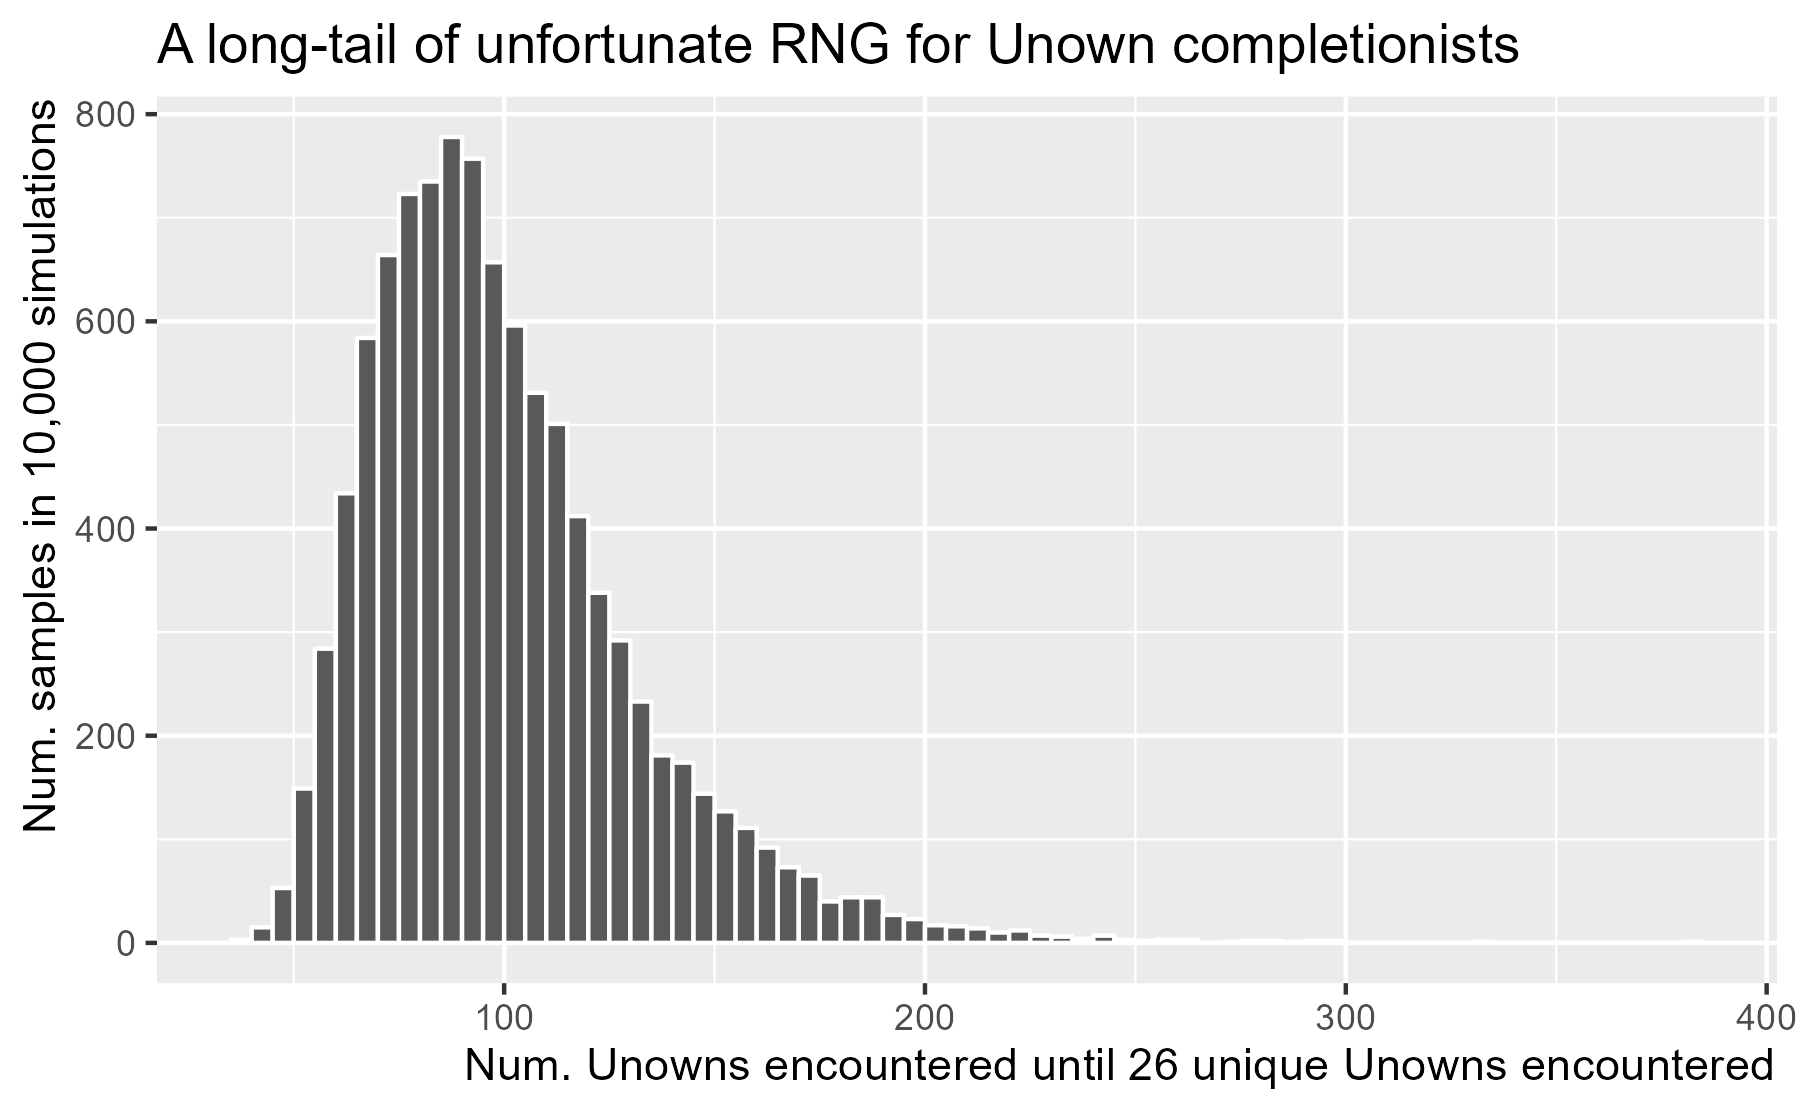 A long-tail of unfortunate RNG for Unown completionists